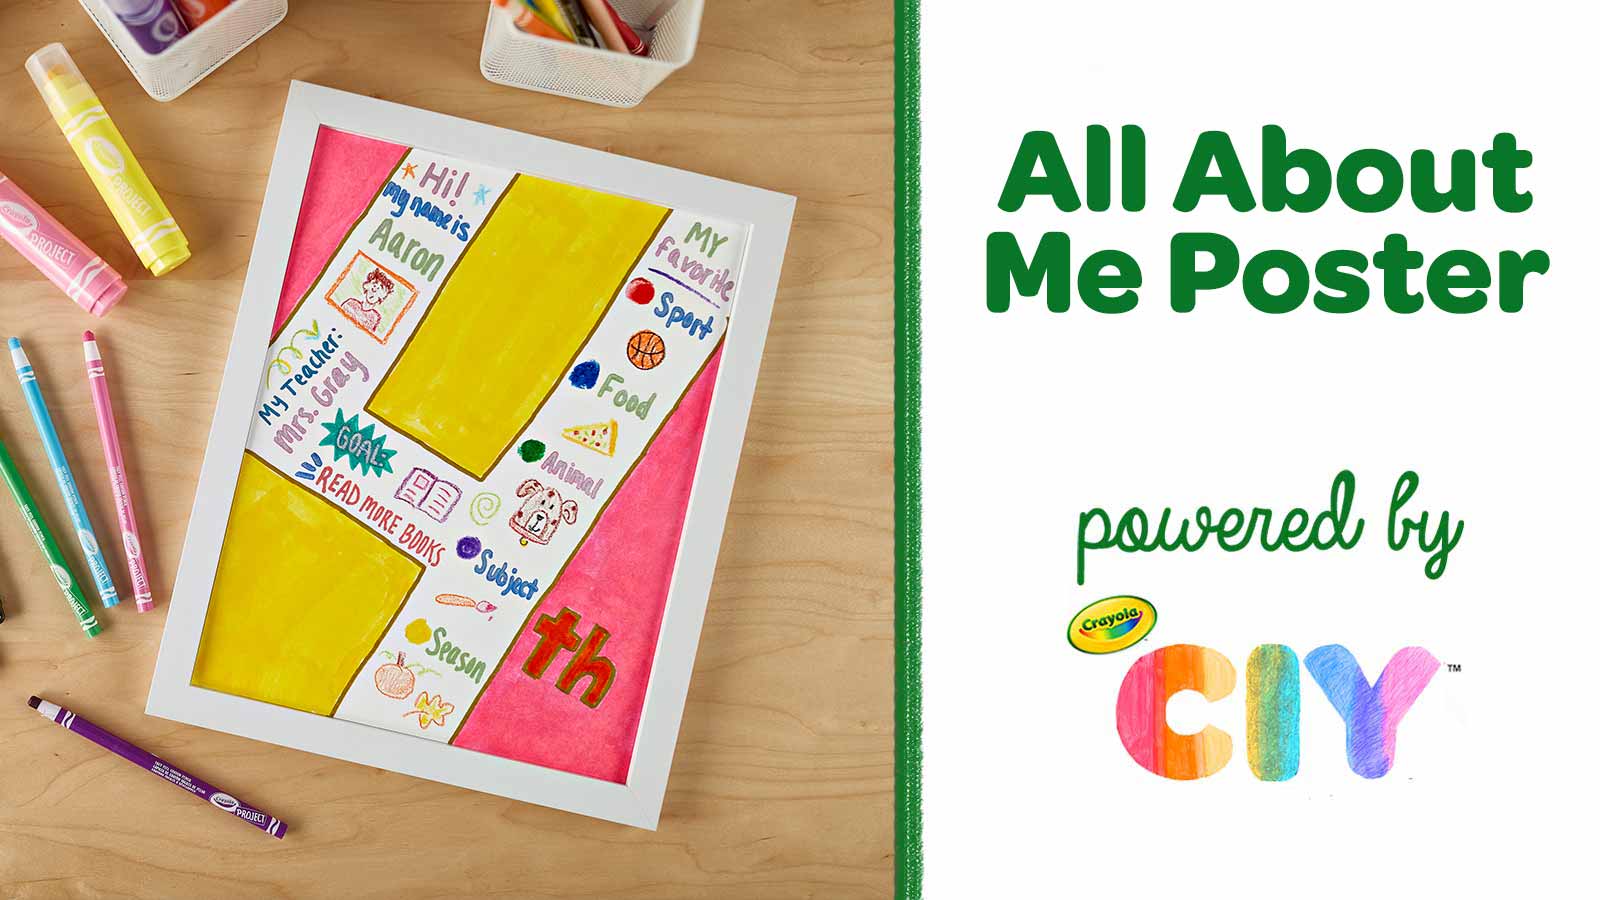 All About Me Poster_Poster Frame